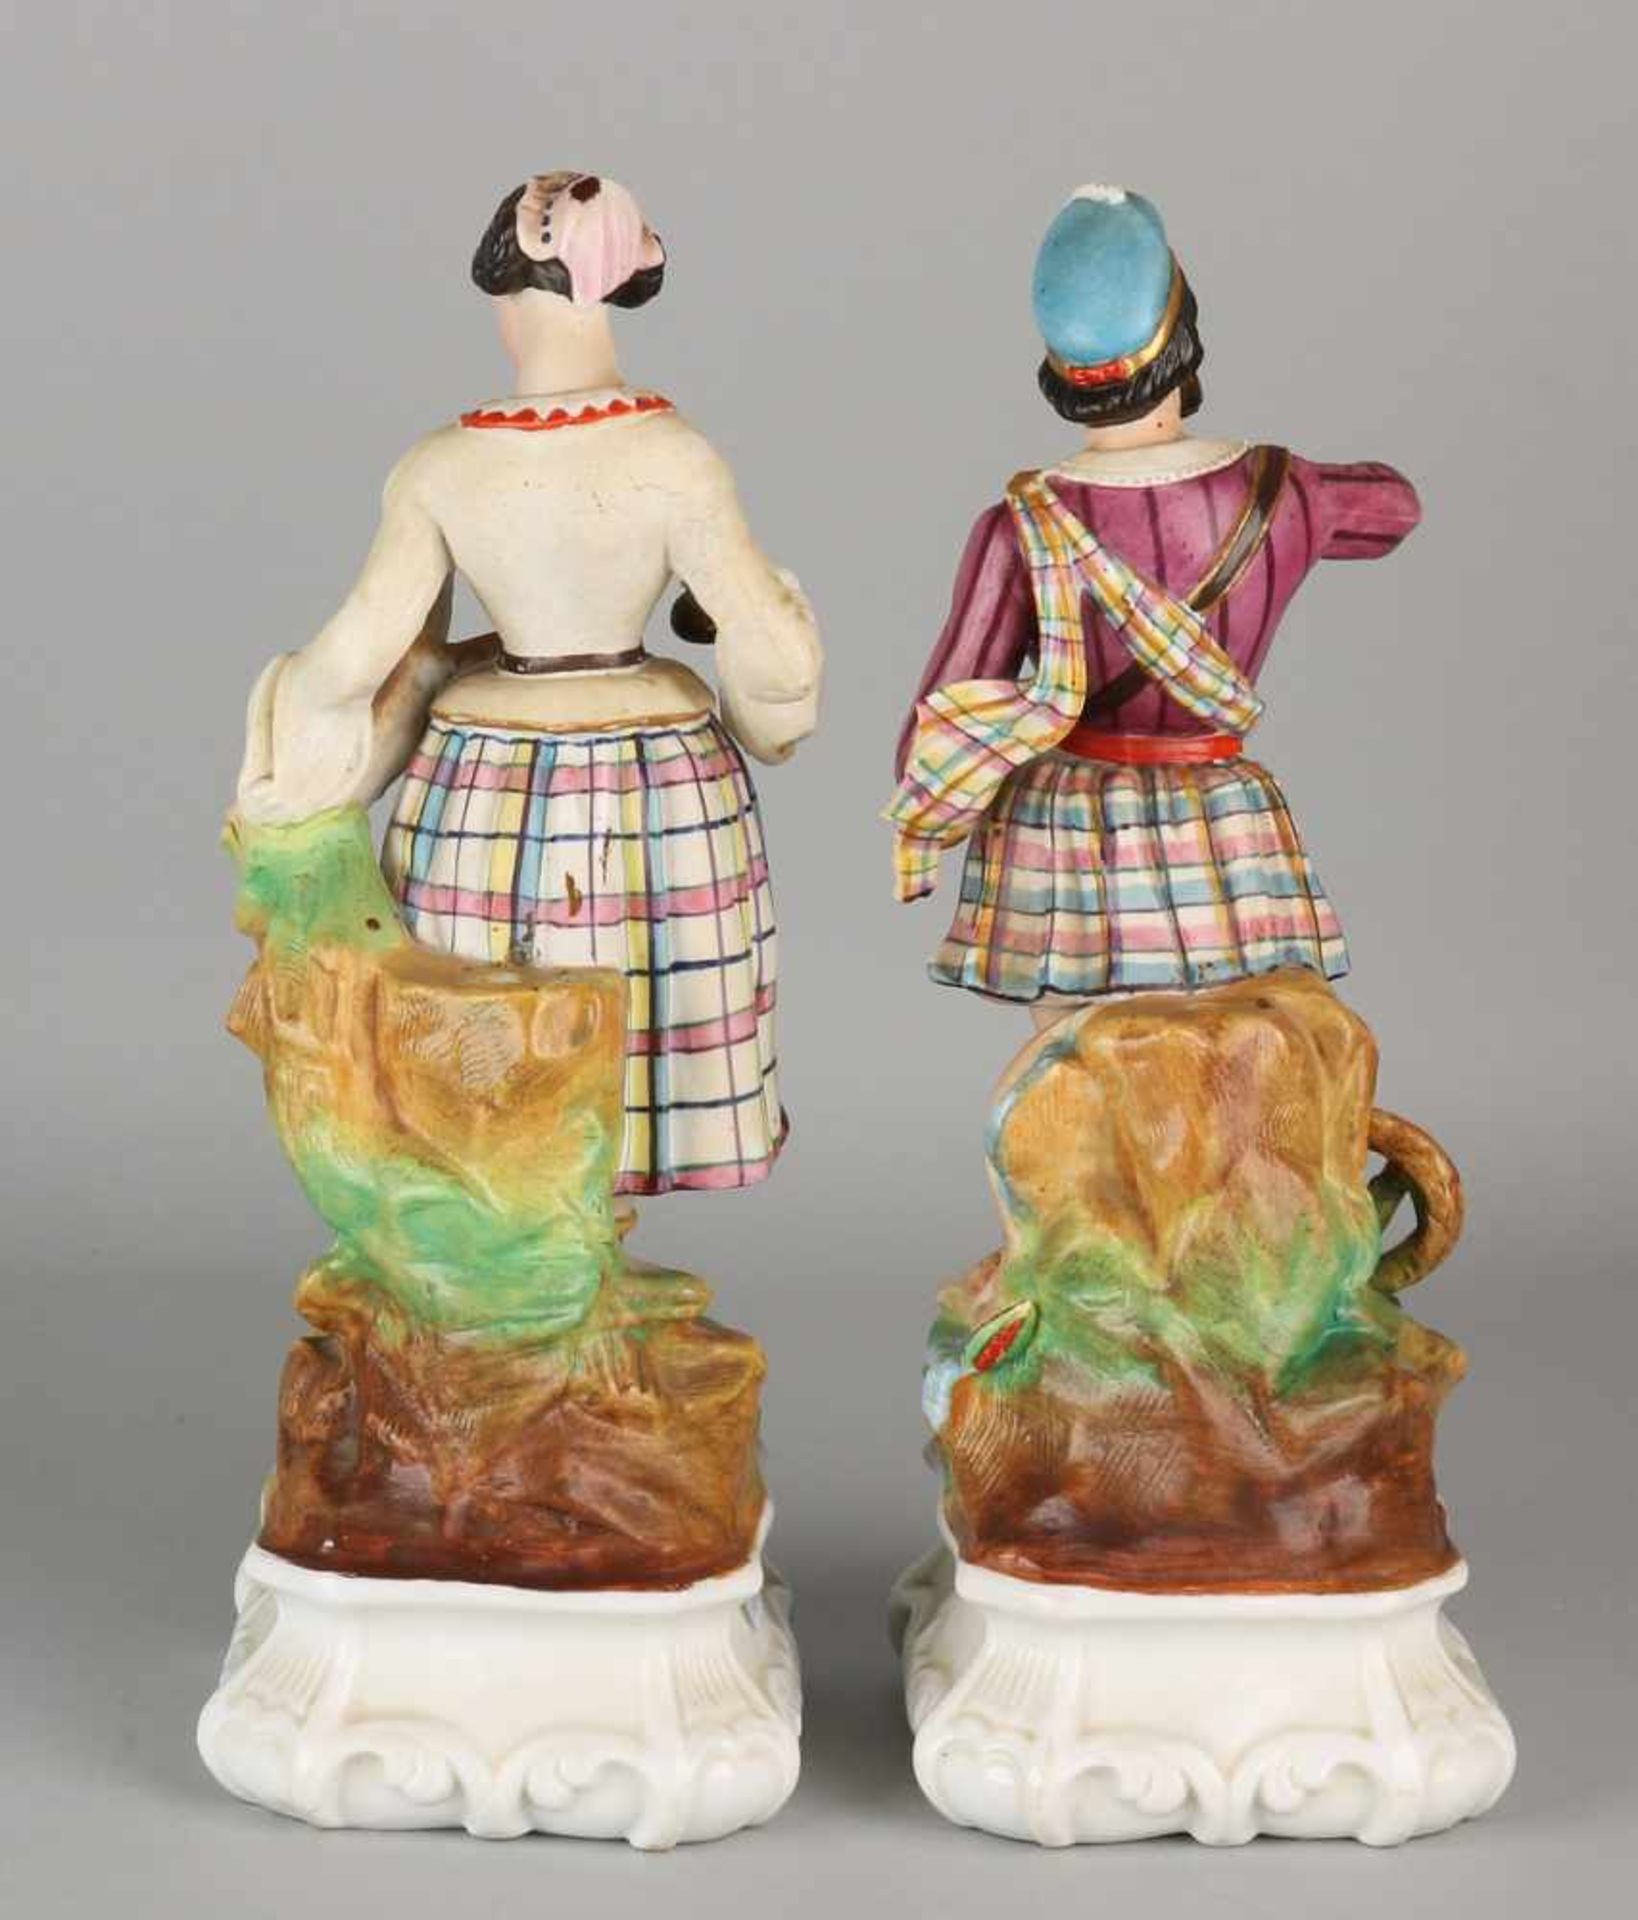 Two 19th century English bisquit porcelain figures. One hand missing. Deer leg missing. Size: 27- - Image 2 of 3